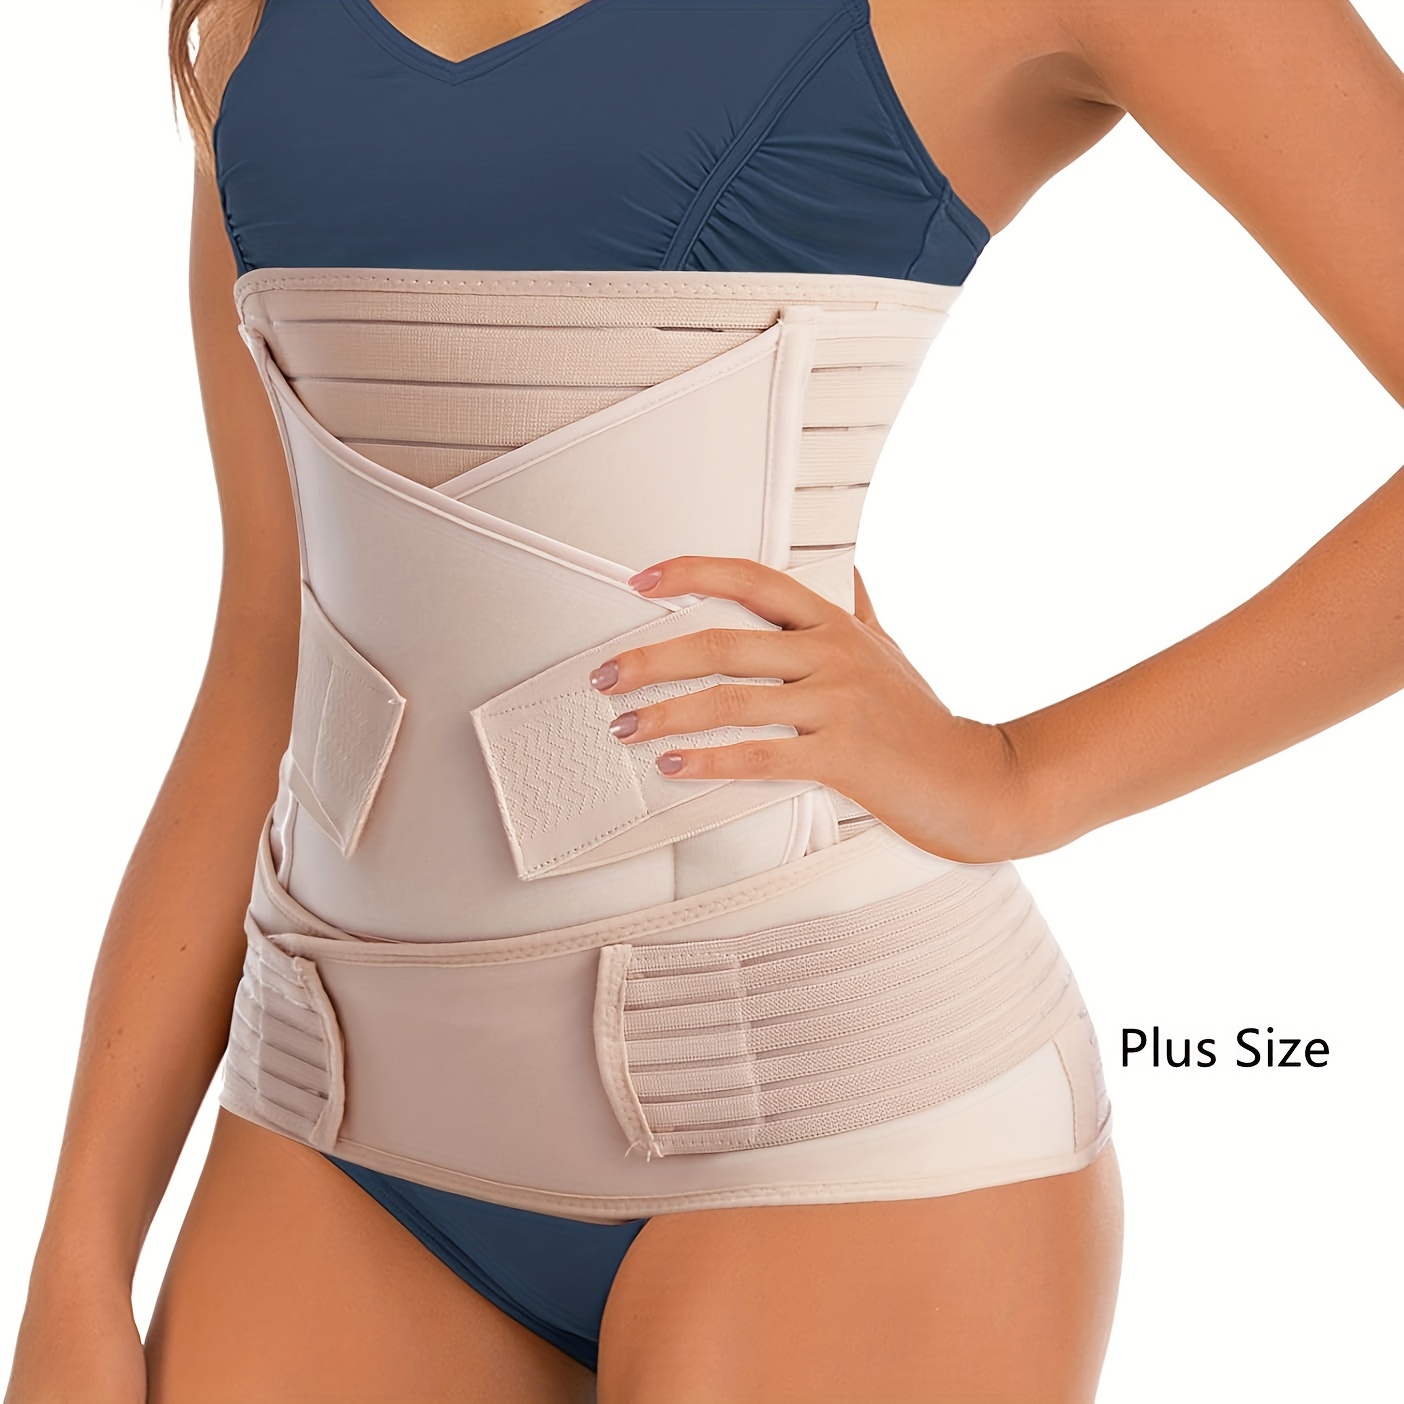 3 In 1 Postpartum Girdle Support Recovery Belly Band Corset Wrap